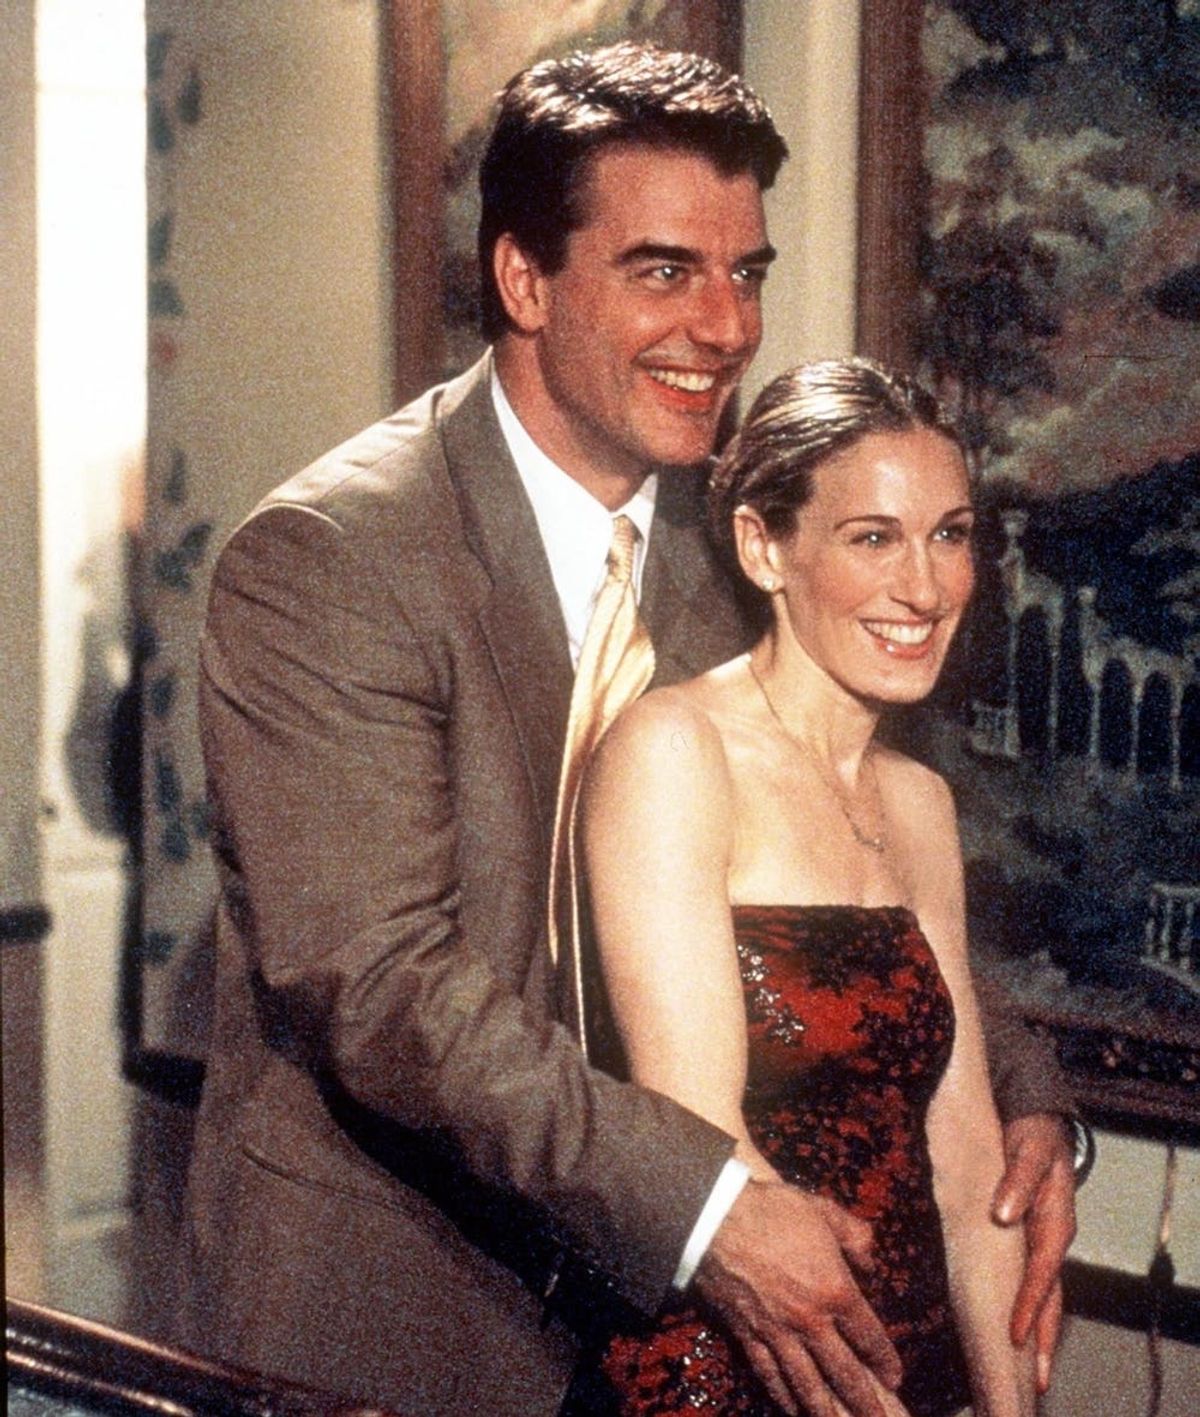 “SATC” Author Candace Bushnell Reveals the *Real* Reason Carrie Chose Big Over Aiden